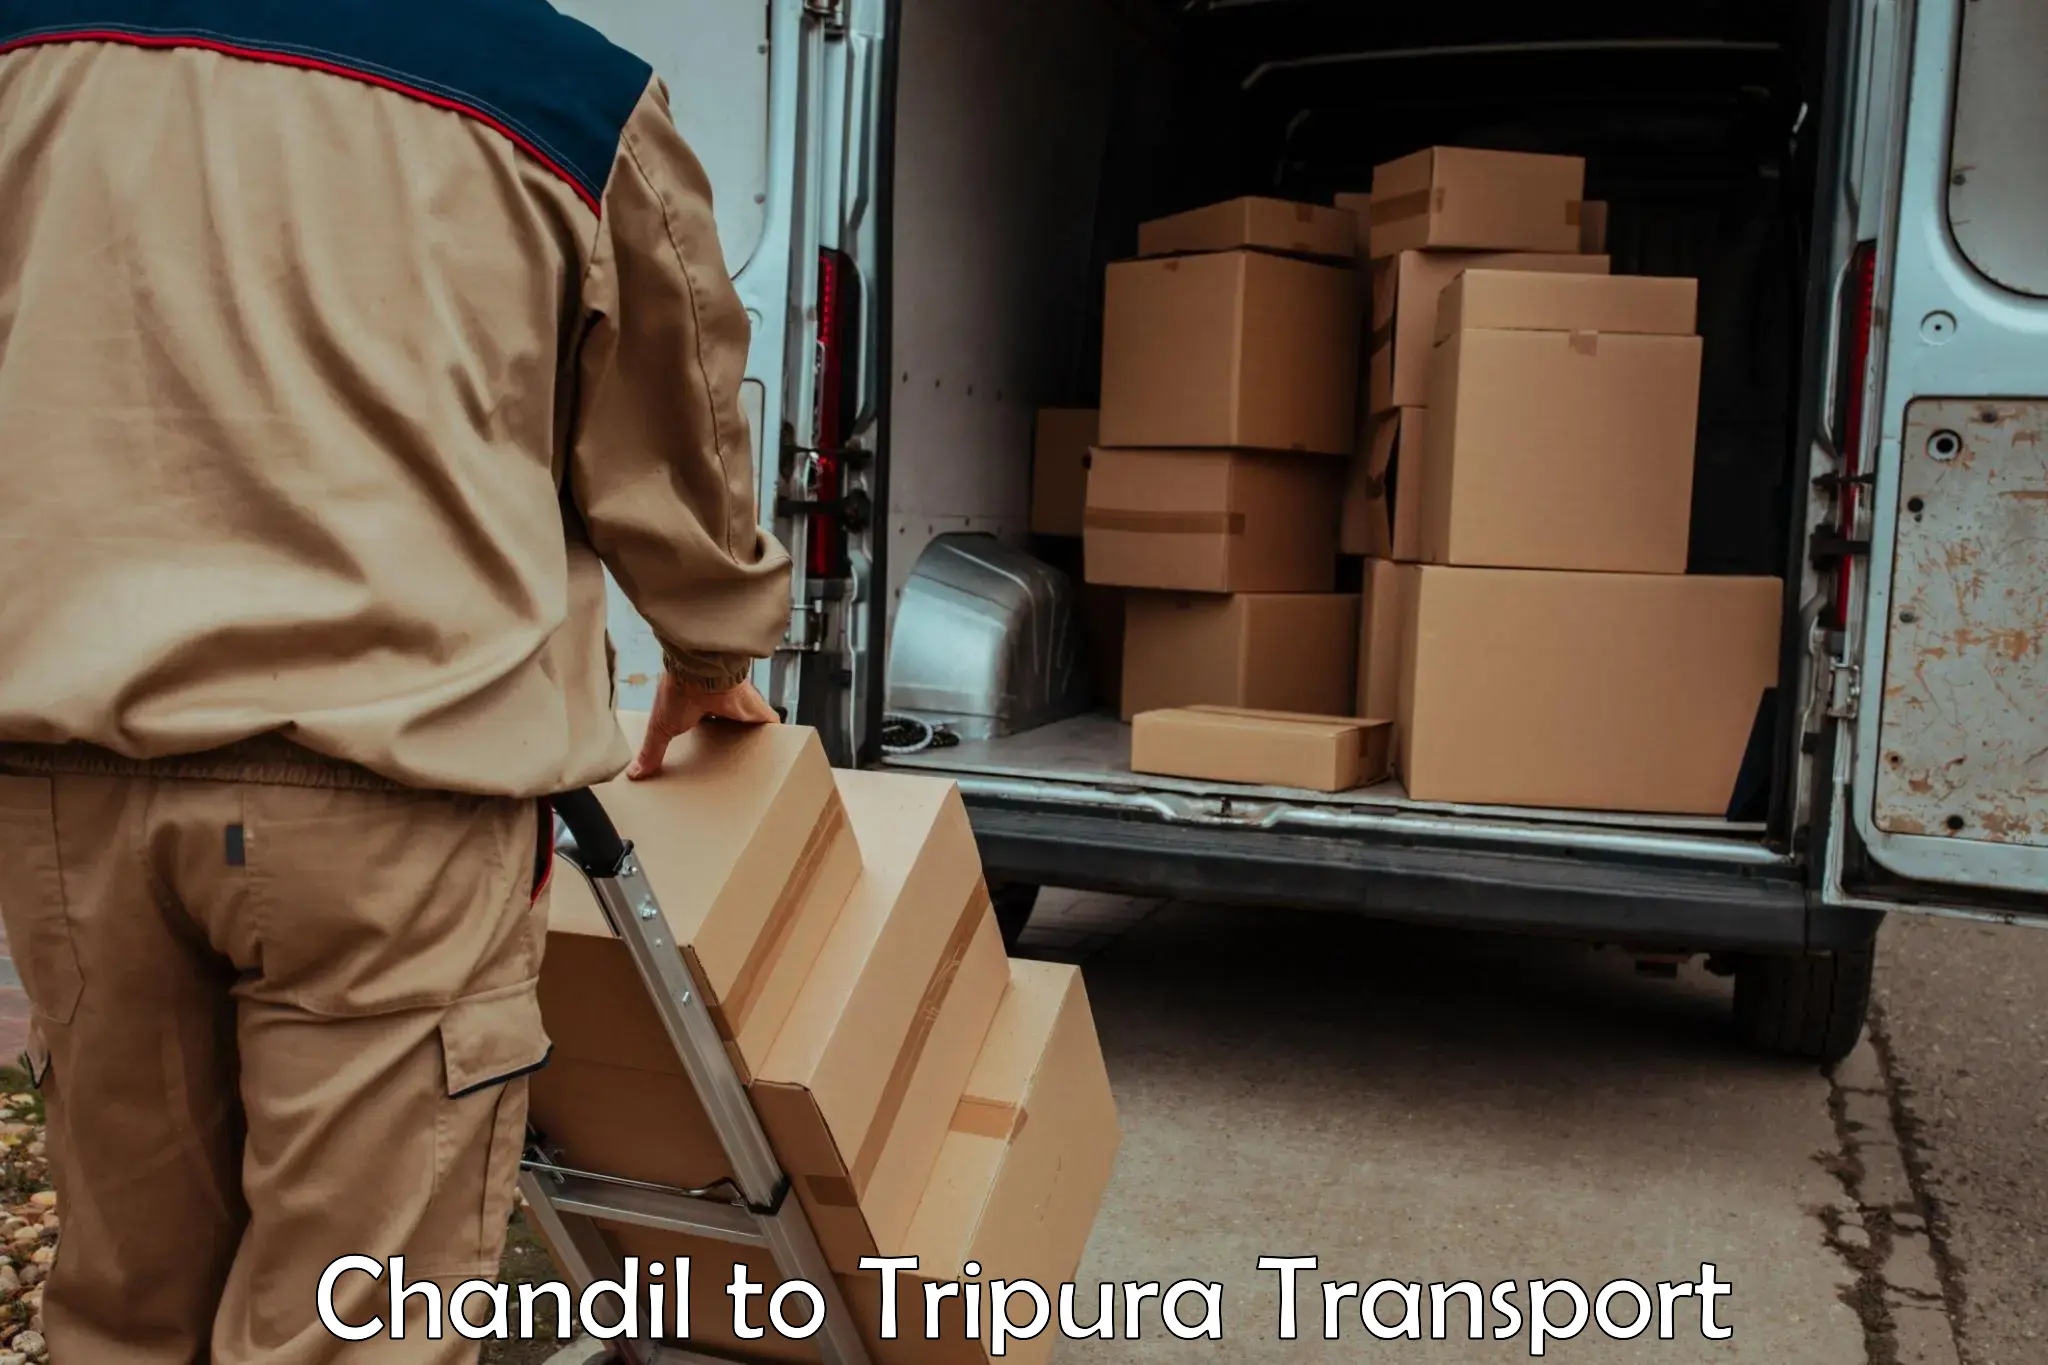 Container transport service Chandil to Tripura